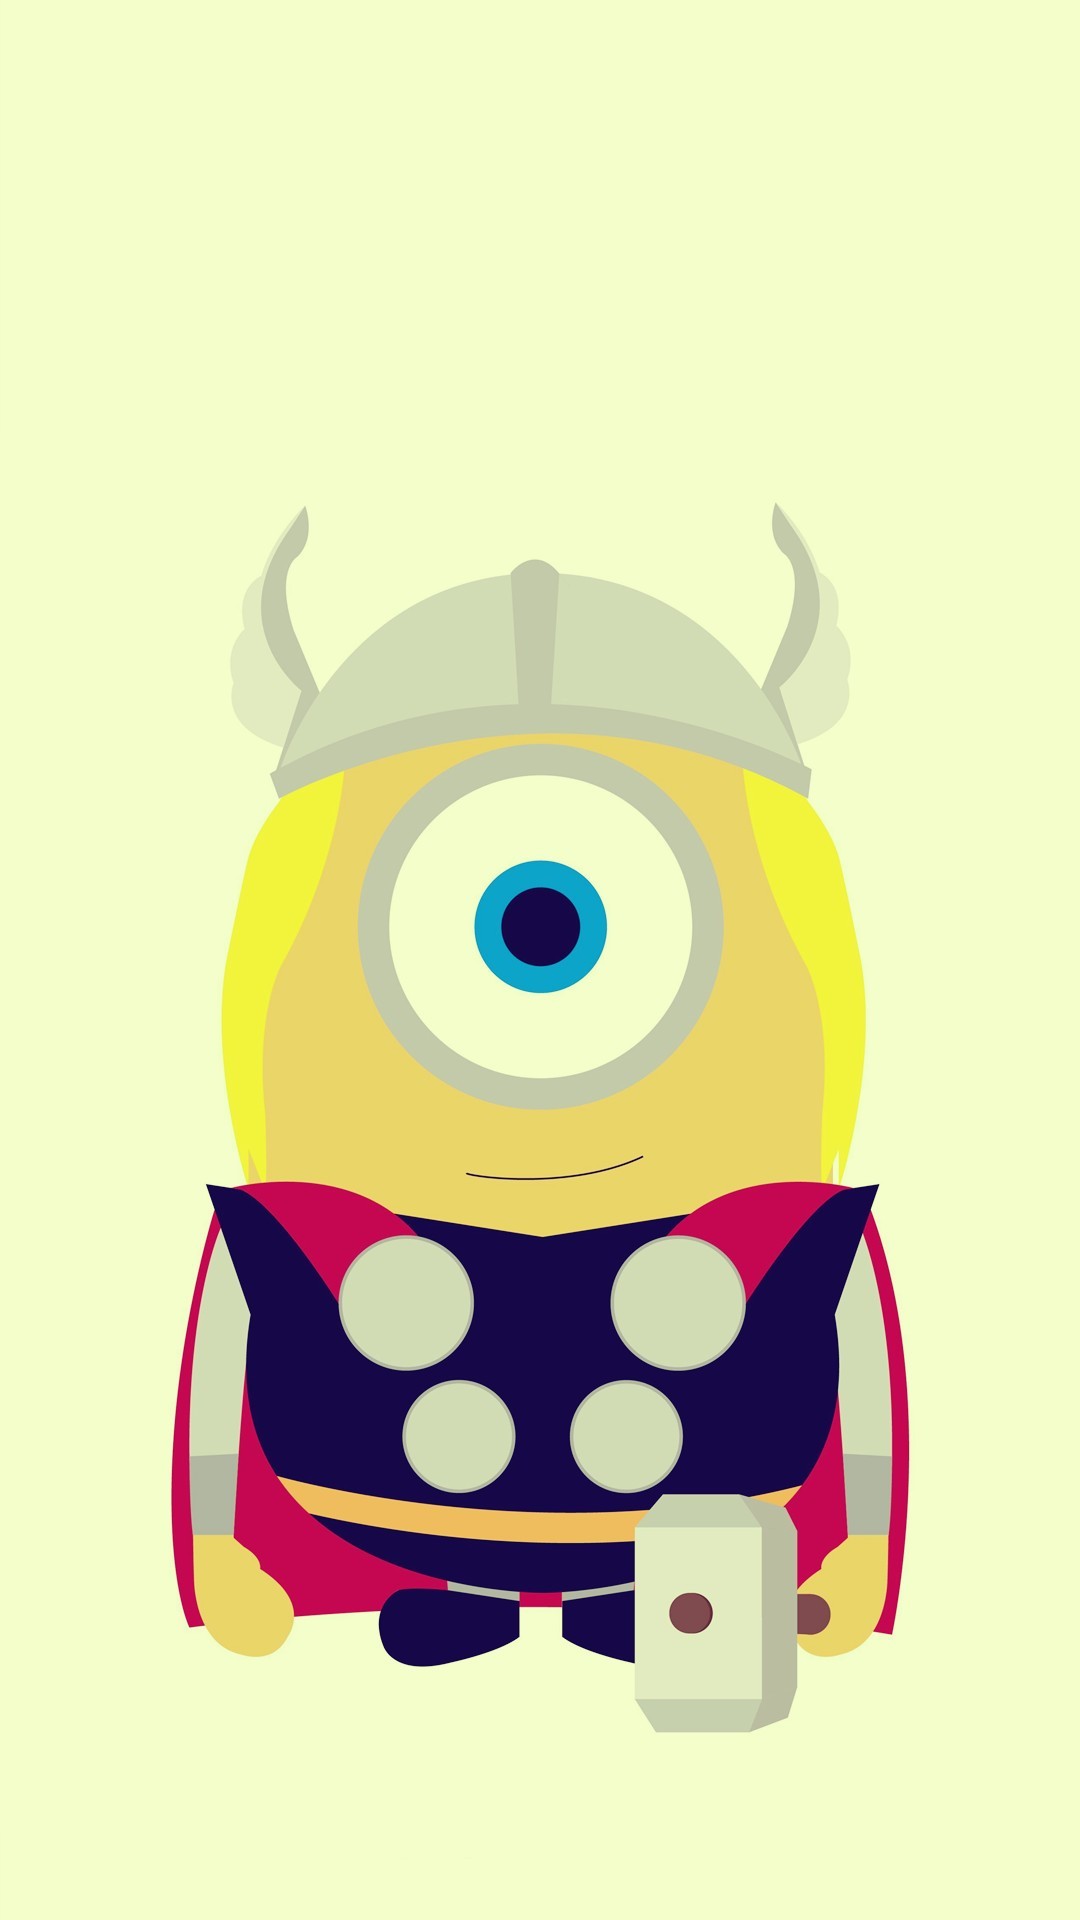 1080x1920 Funny Thor Minion Avengers iphone 6 plus wallpaper HD - 2014 Halloween,  Despicable Me #